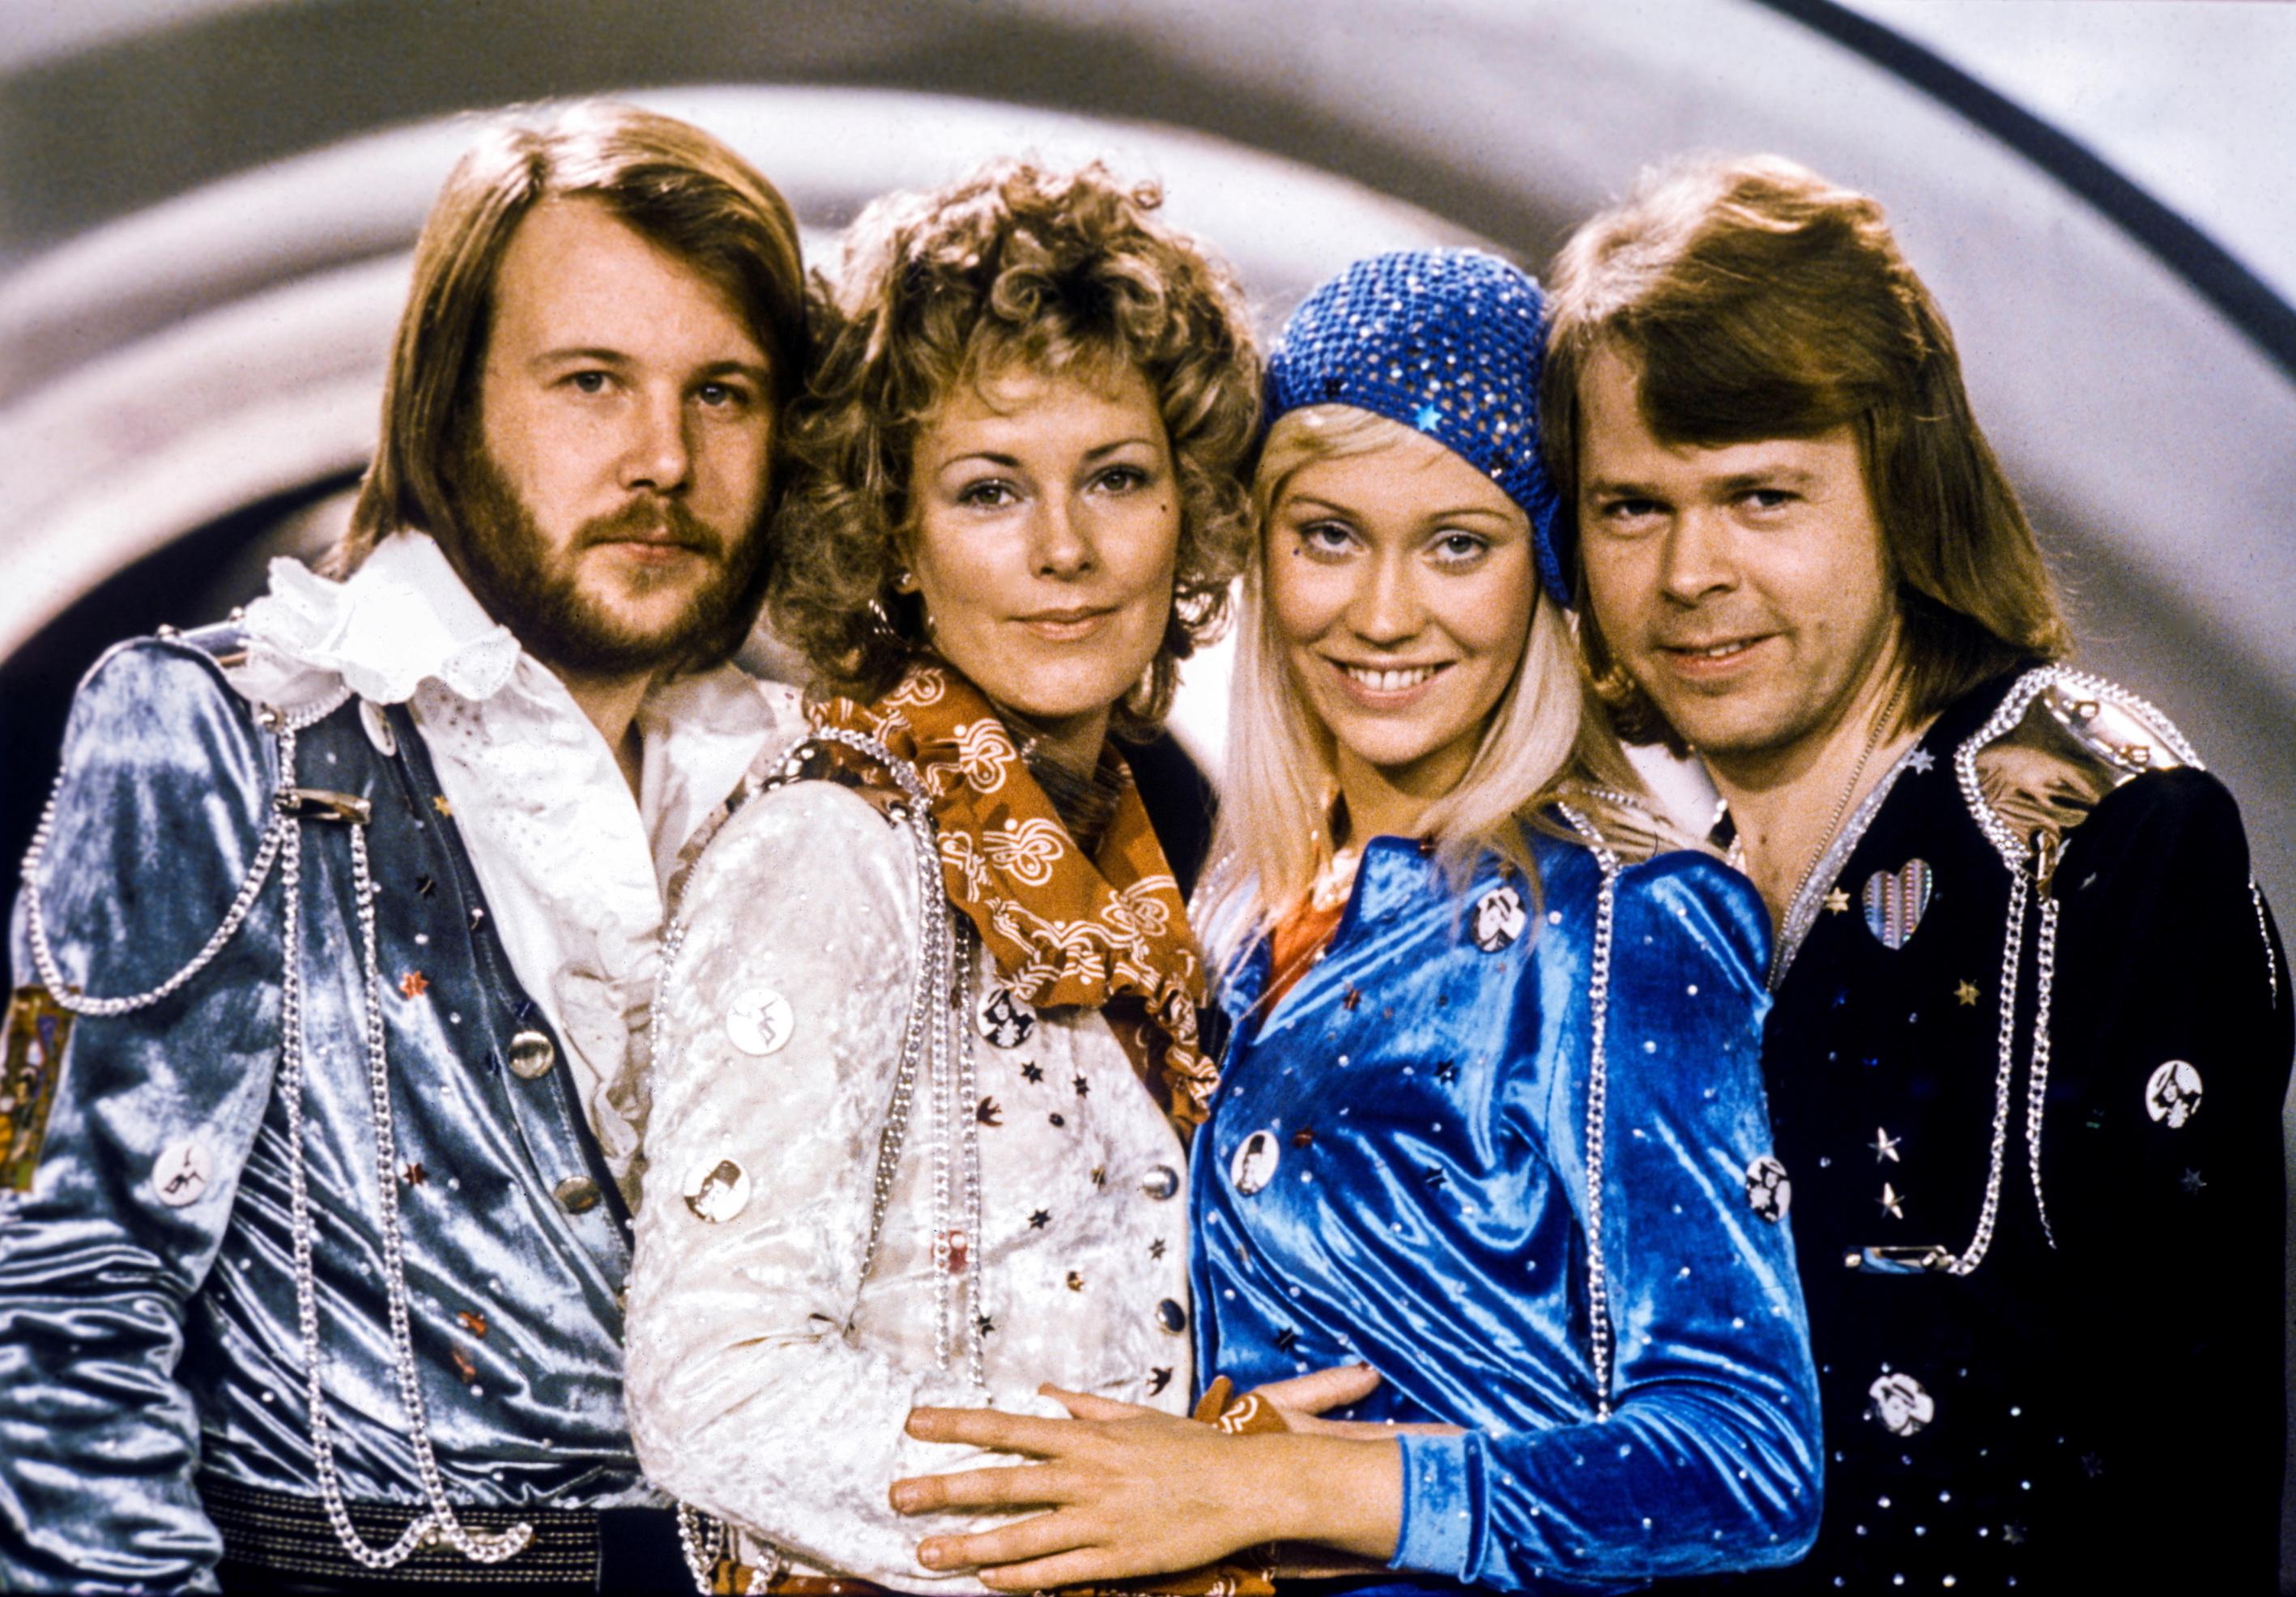 ABBA returns with new album after 40-year hiatus